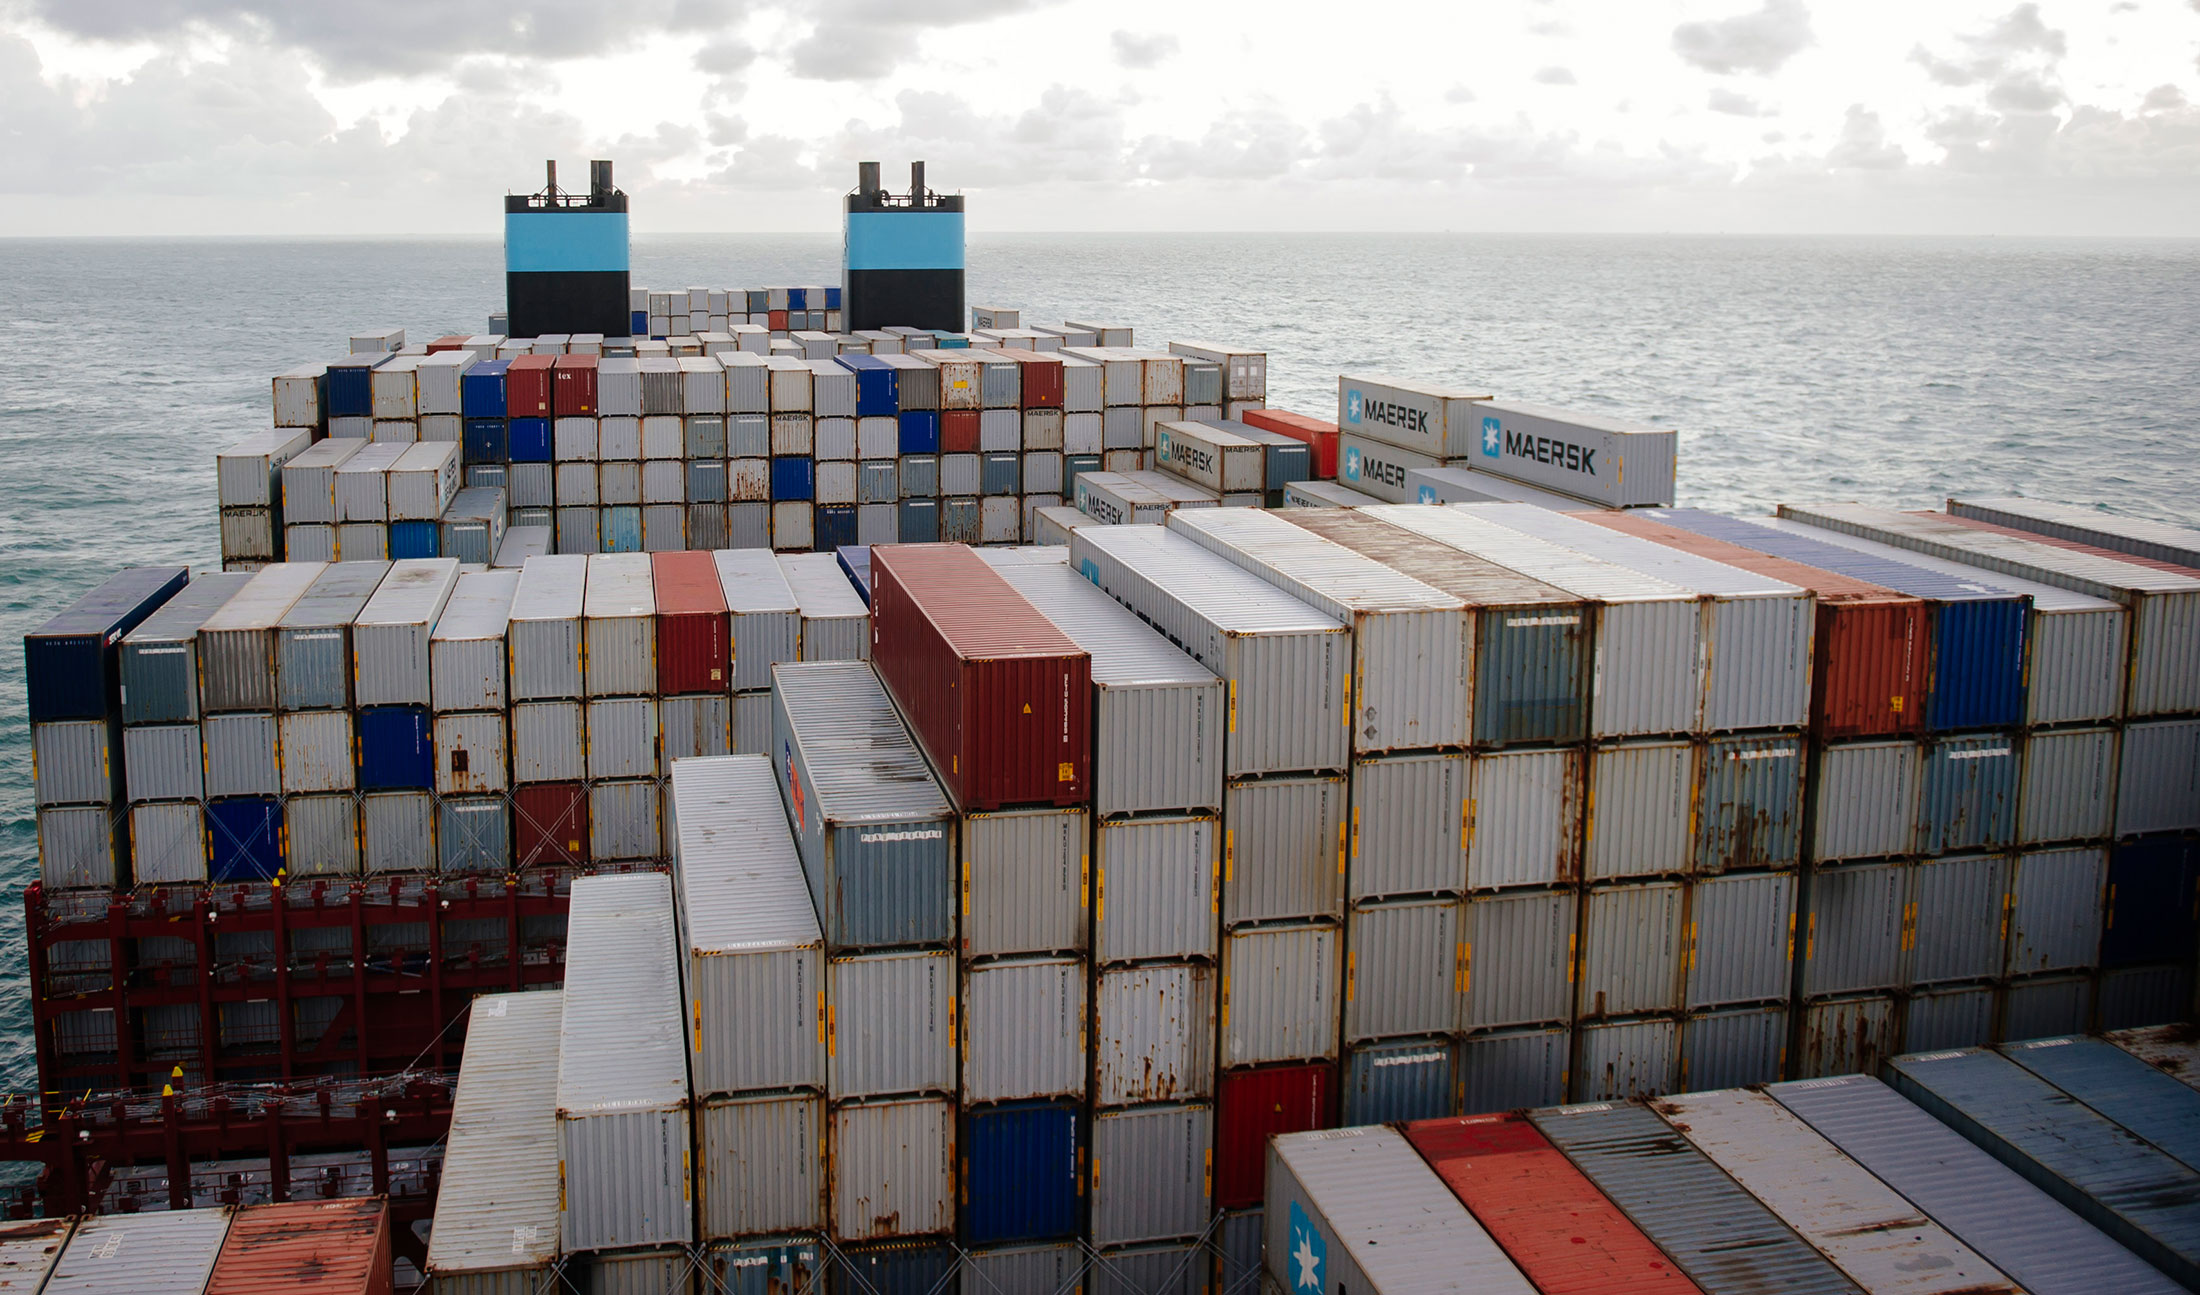 Shipping containers stand aboard the Maersk Mc-Kinney Moeller Triple-E Class container ship, operated by A.P. Moeller-Maersk A/S, as it sails on the North Sea between Rotterdam in the Netherlands and Bremerhaven, Germany, on Monday, Nov. 11, 2013. A.P. Moeller-Maersk A/S's container-shipping line, the world's largest, reported an 11 percent increase in third-quarter profit after cost cuts countered a decline in freight rates.
